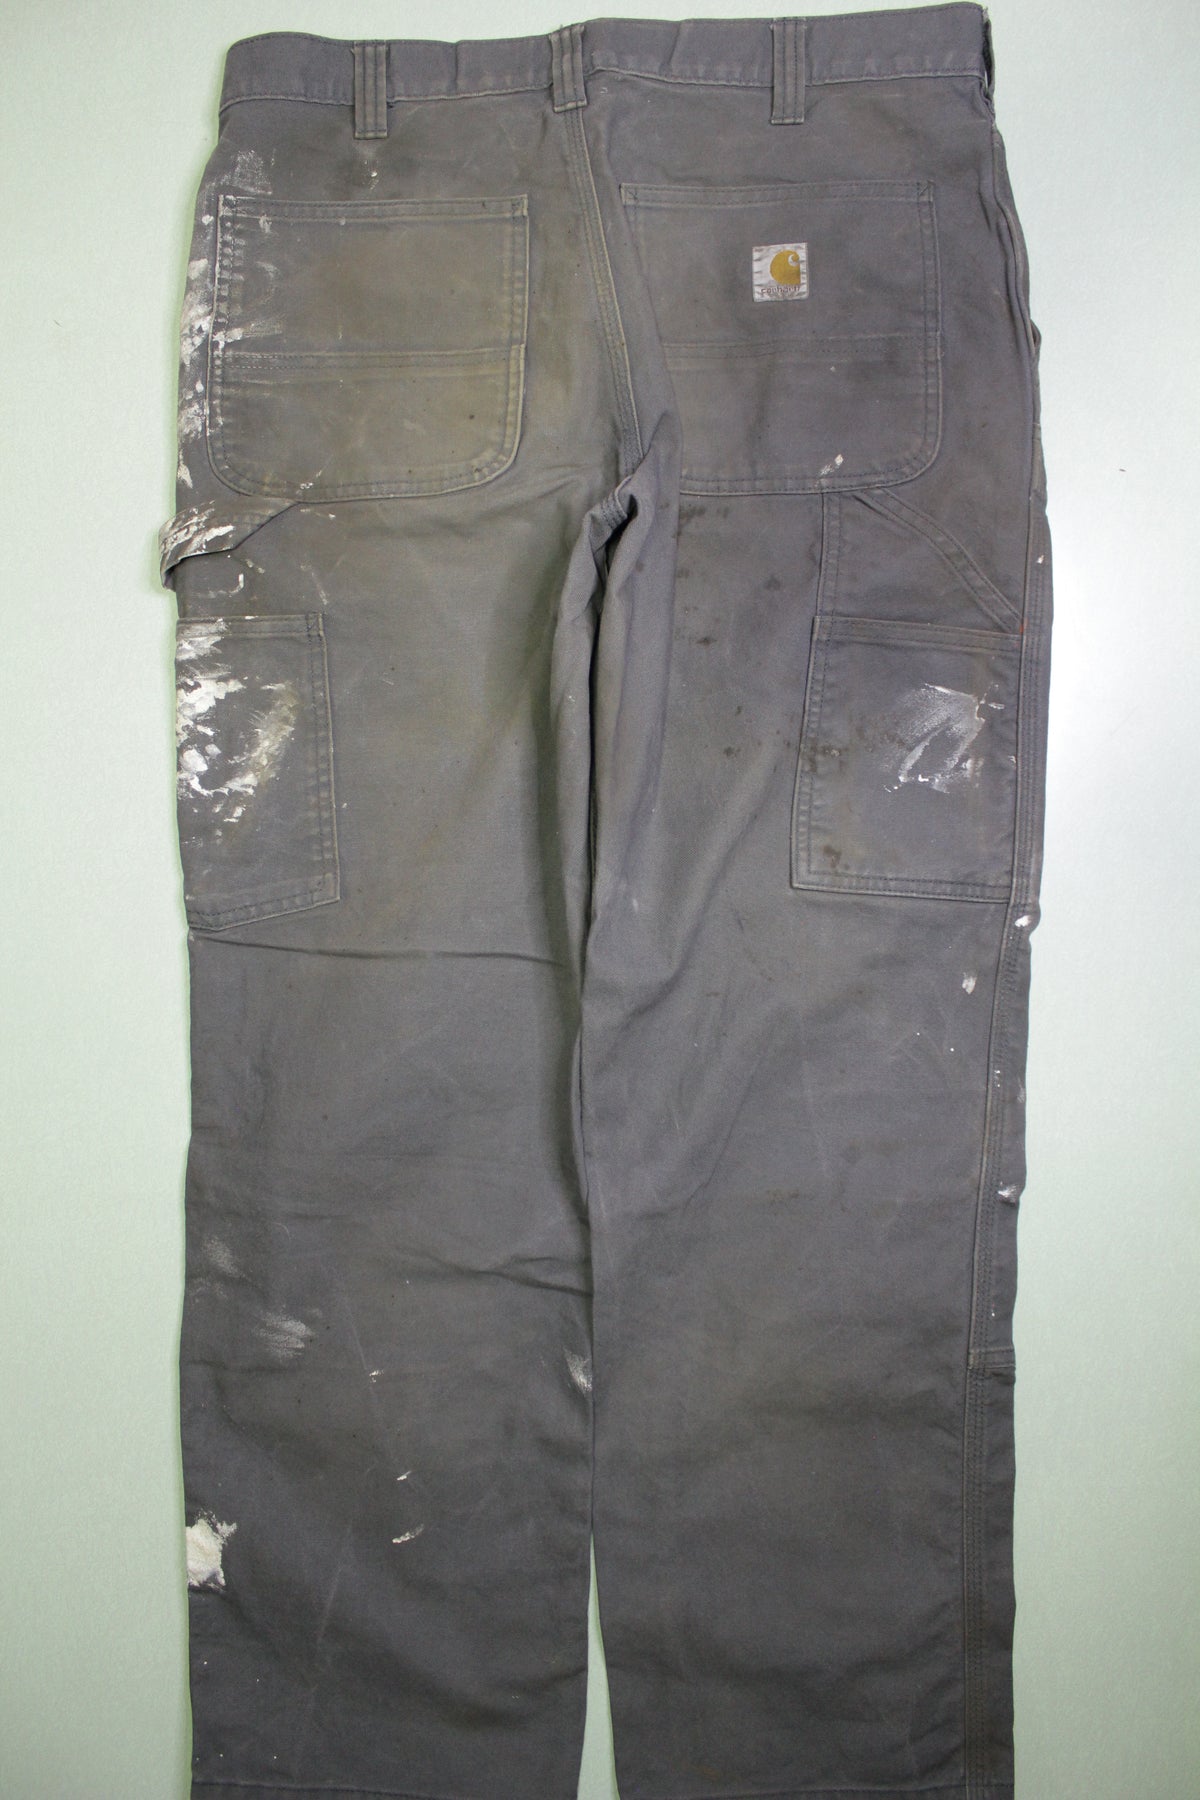 Carhartt Vintage Distressed 103334 029 Double Knee Front Work Construction Utility Pants